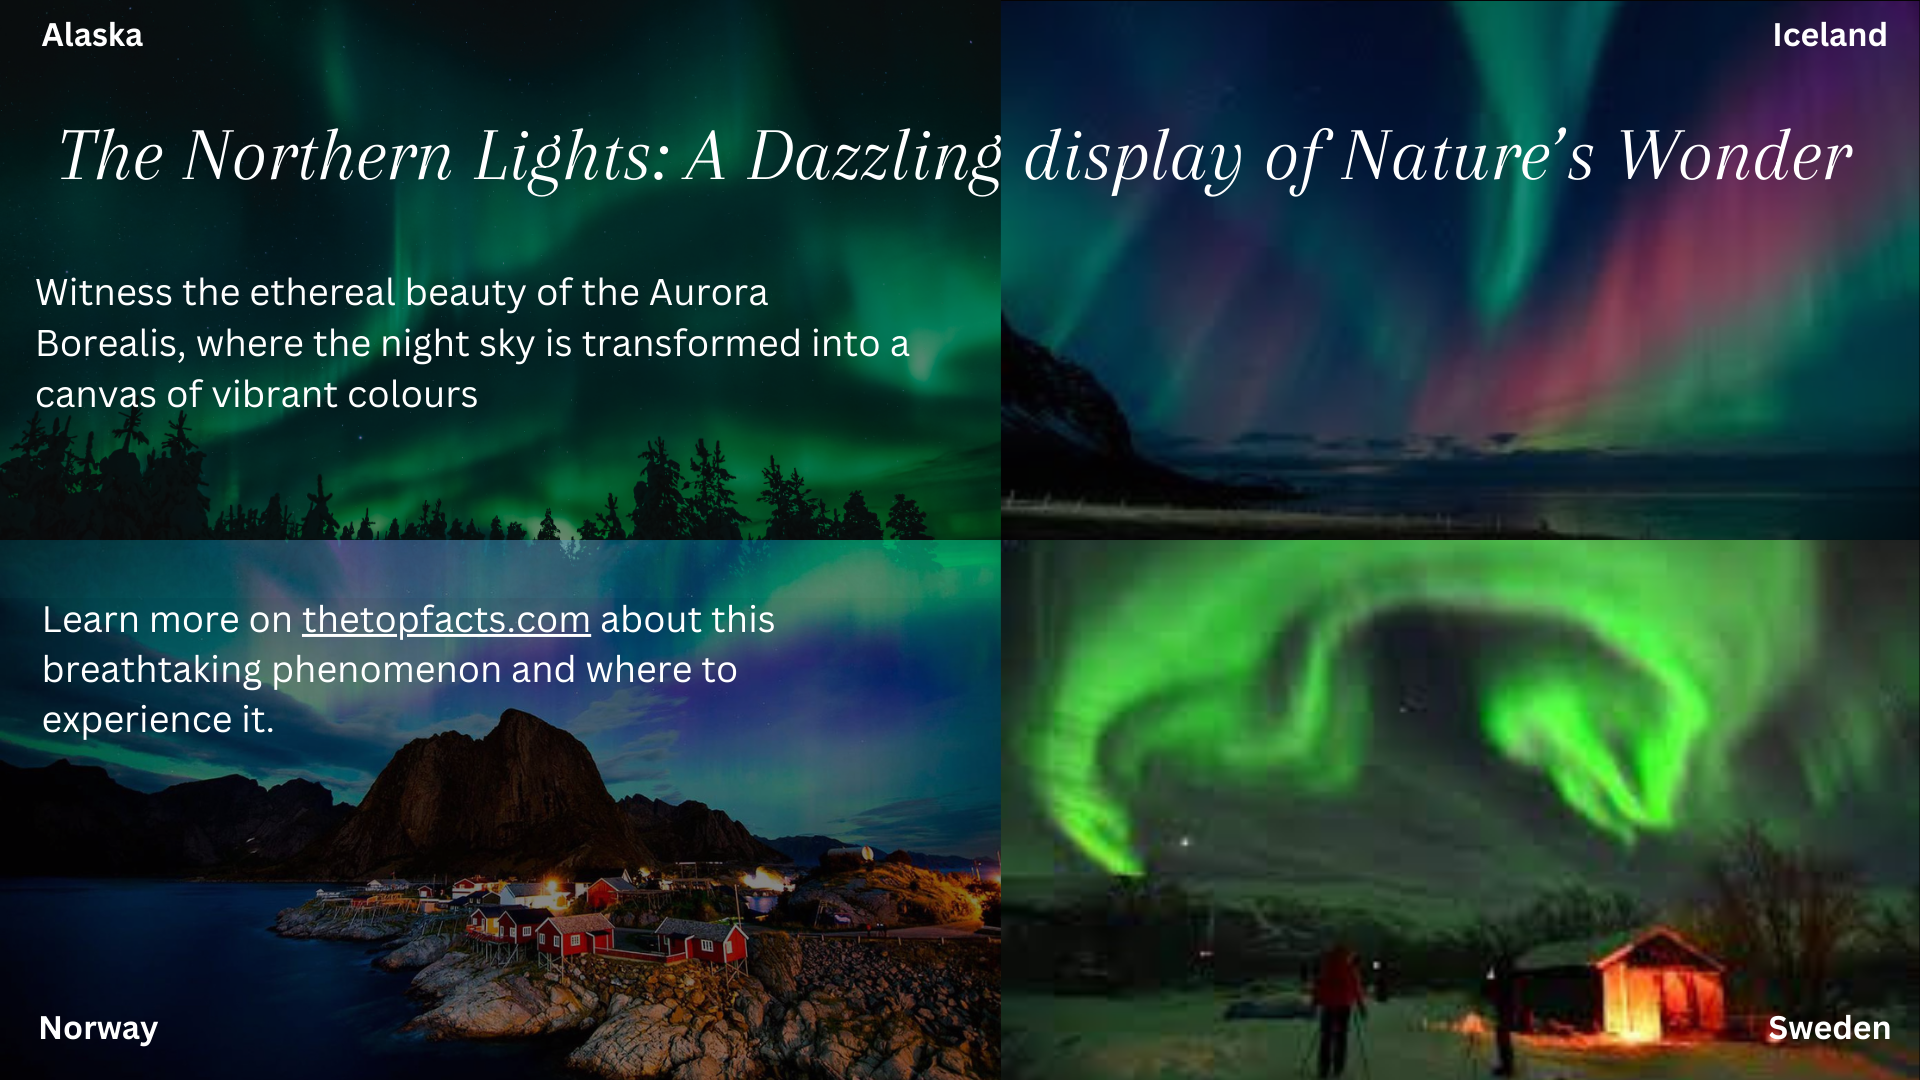 Best place to visit in December is surely the Northern lights